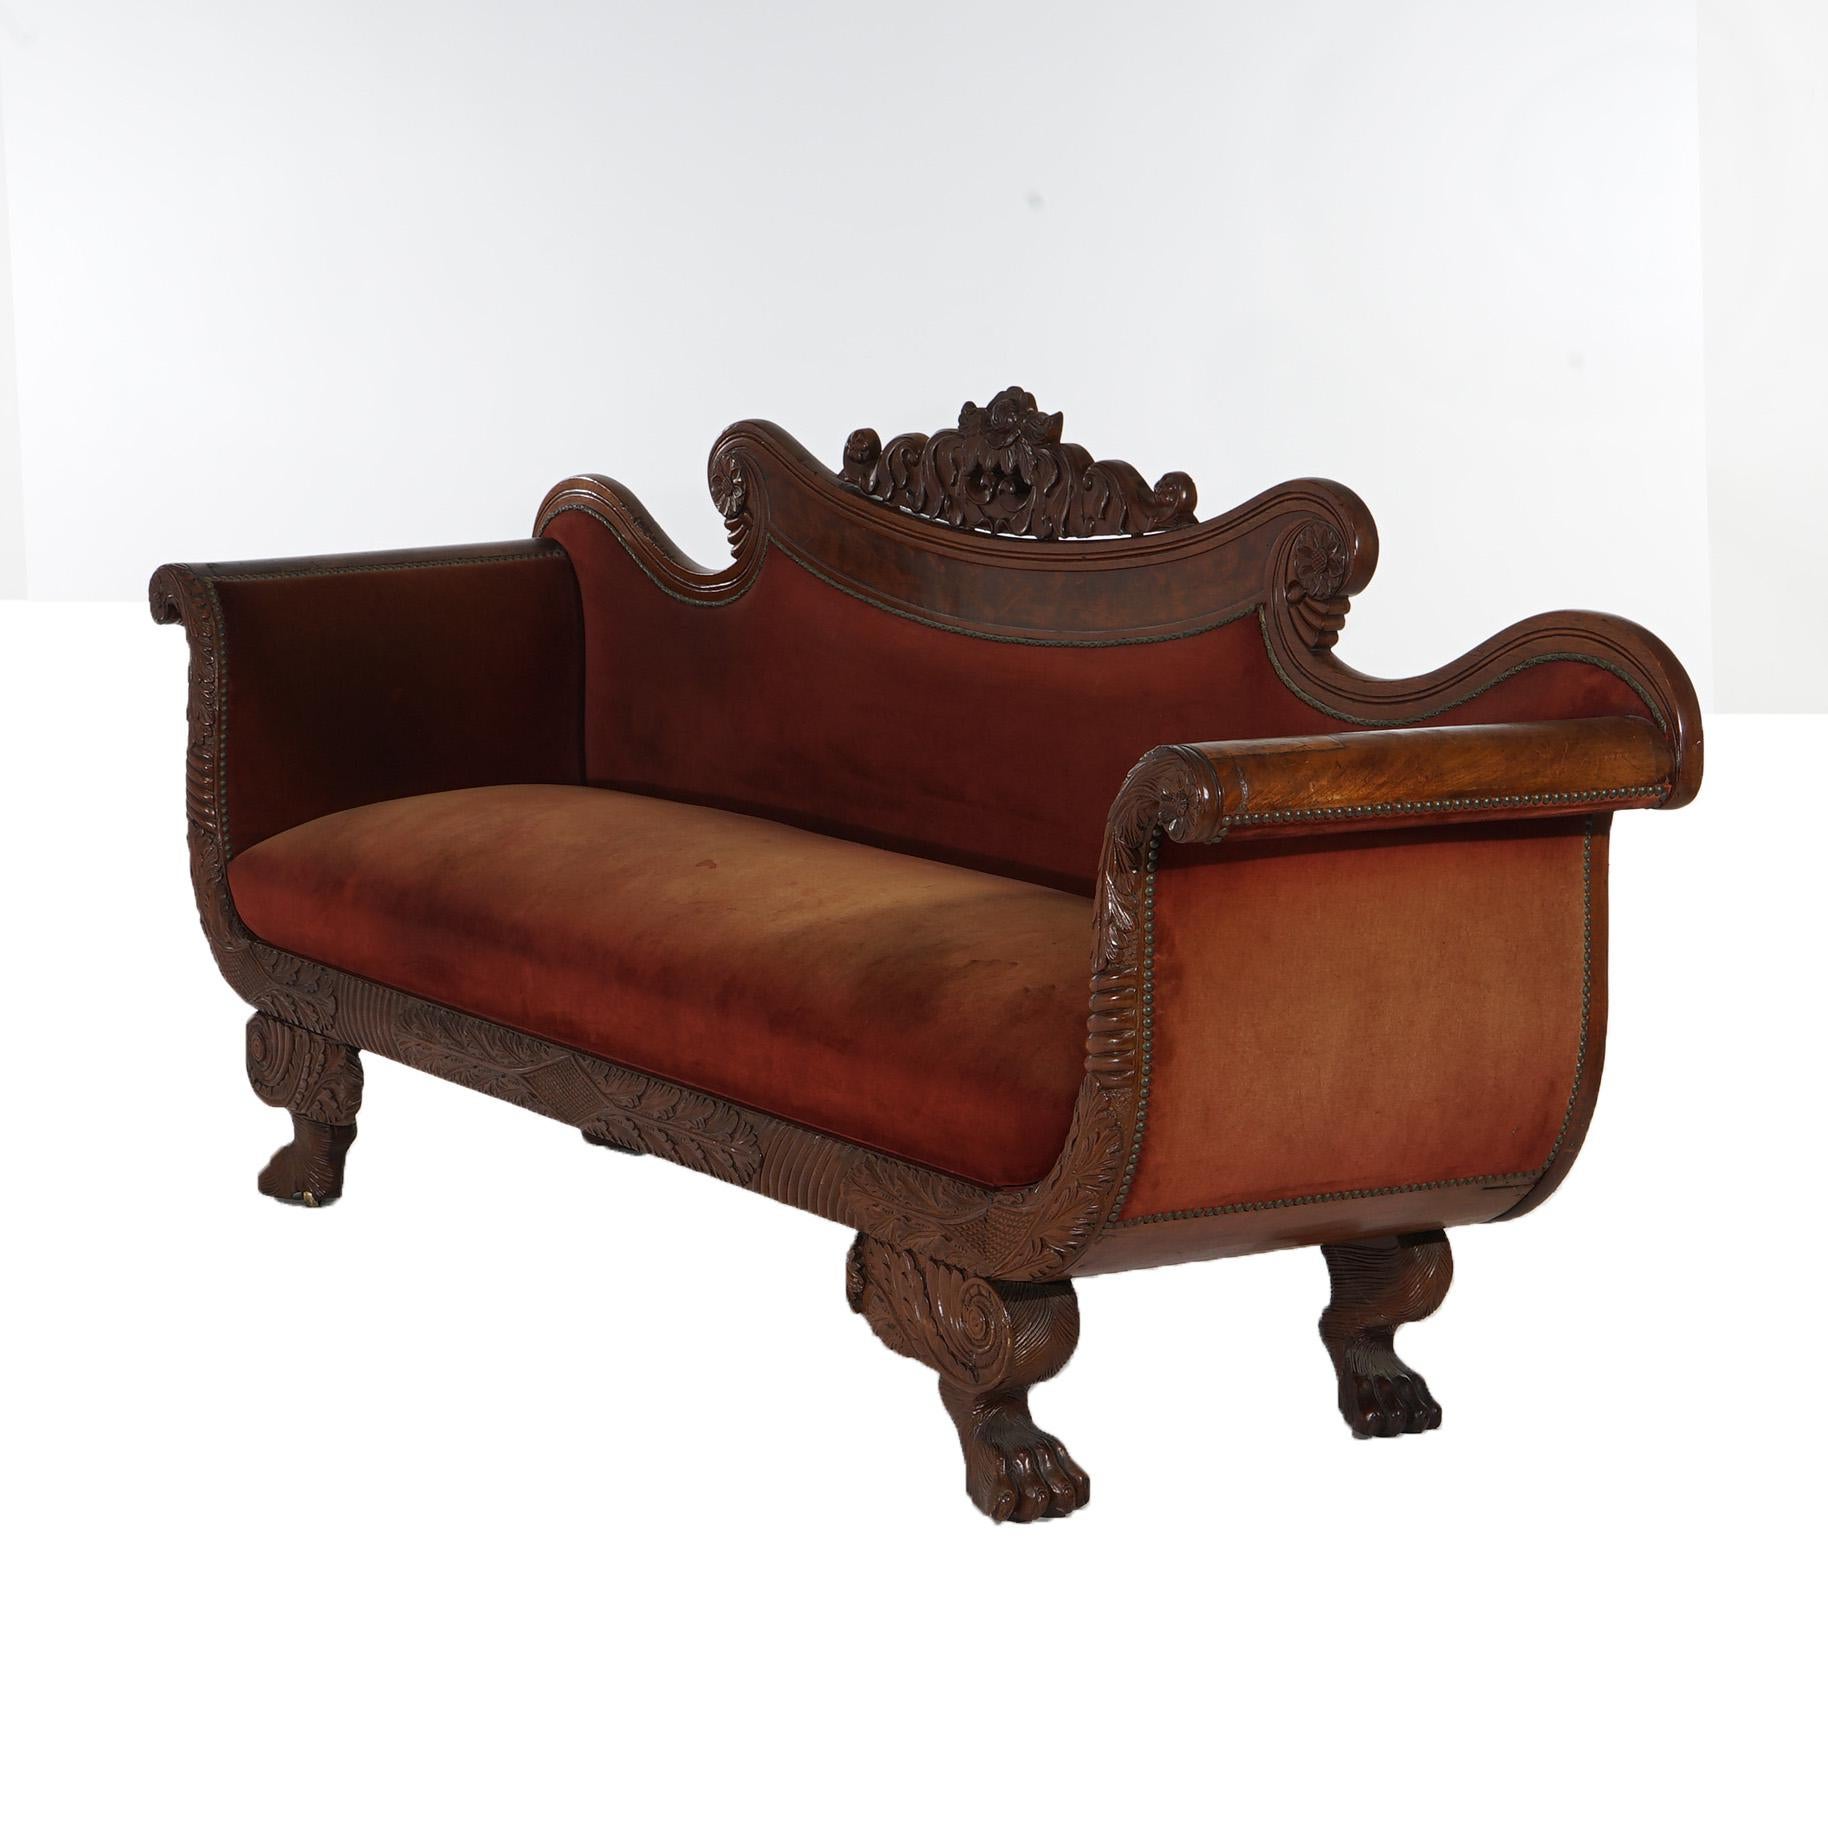 Antique Neoclassical American Empire Carved Walnut And Burl Sofa C1840 For Sale 5